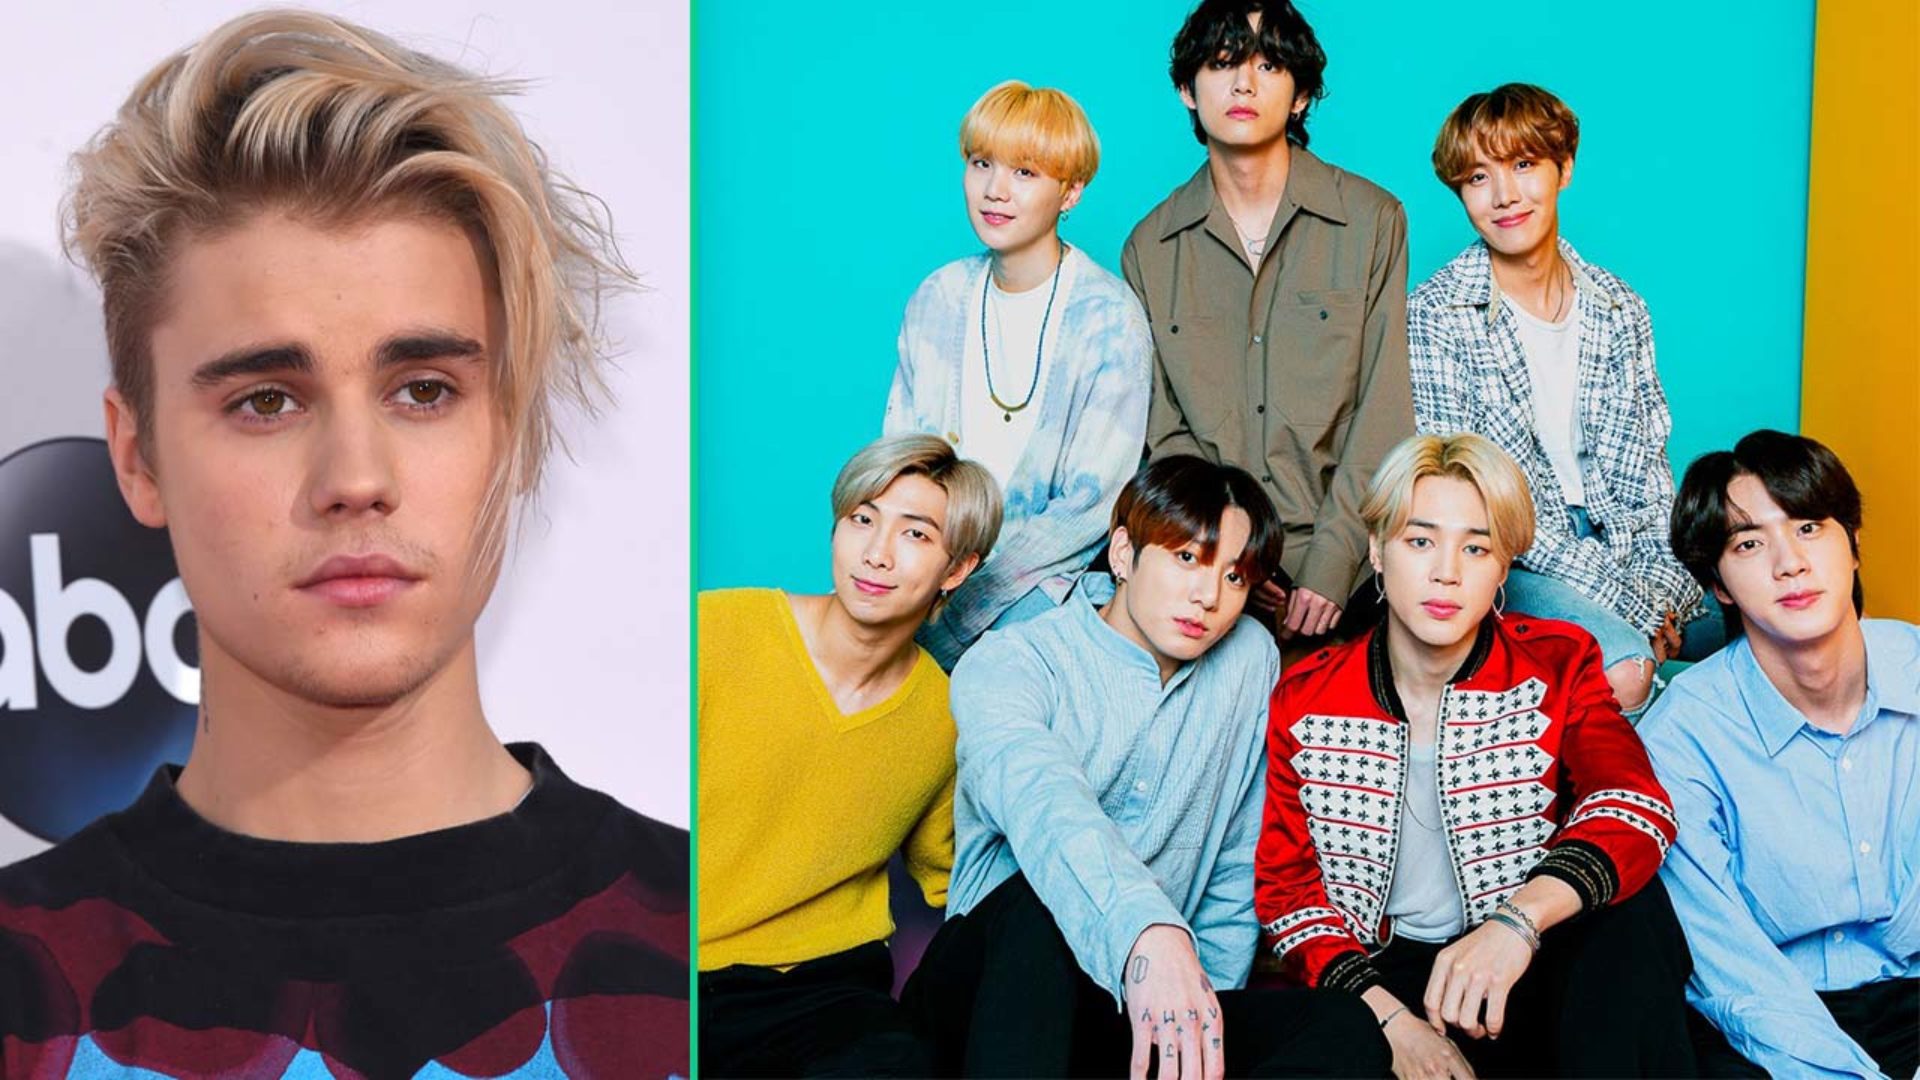 Bts Breaks Justin Bieber’s All-time Record For Most - Bts - HD Wallpaper 